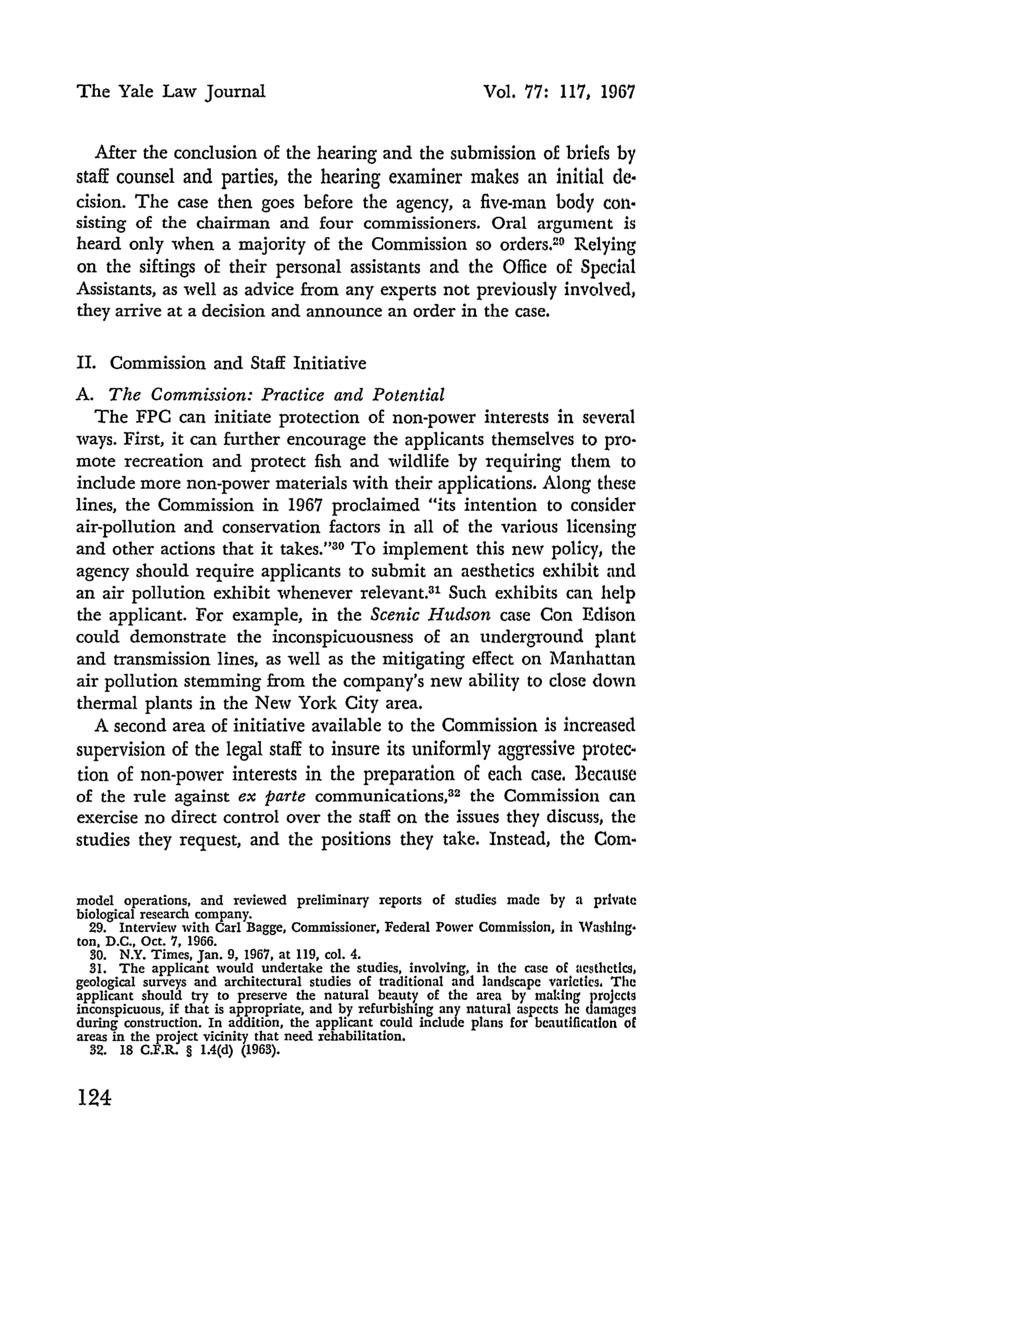 The Yale Law Journal Vol. 77: 117, 1967 After the conclusion of the hearing and the submission of briefs by staff counsel and parties, the hearing examiner makes an initial de. cision.